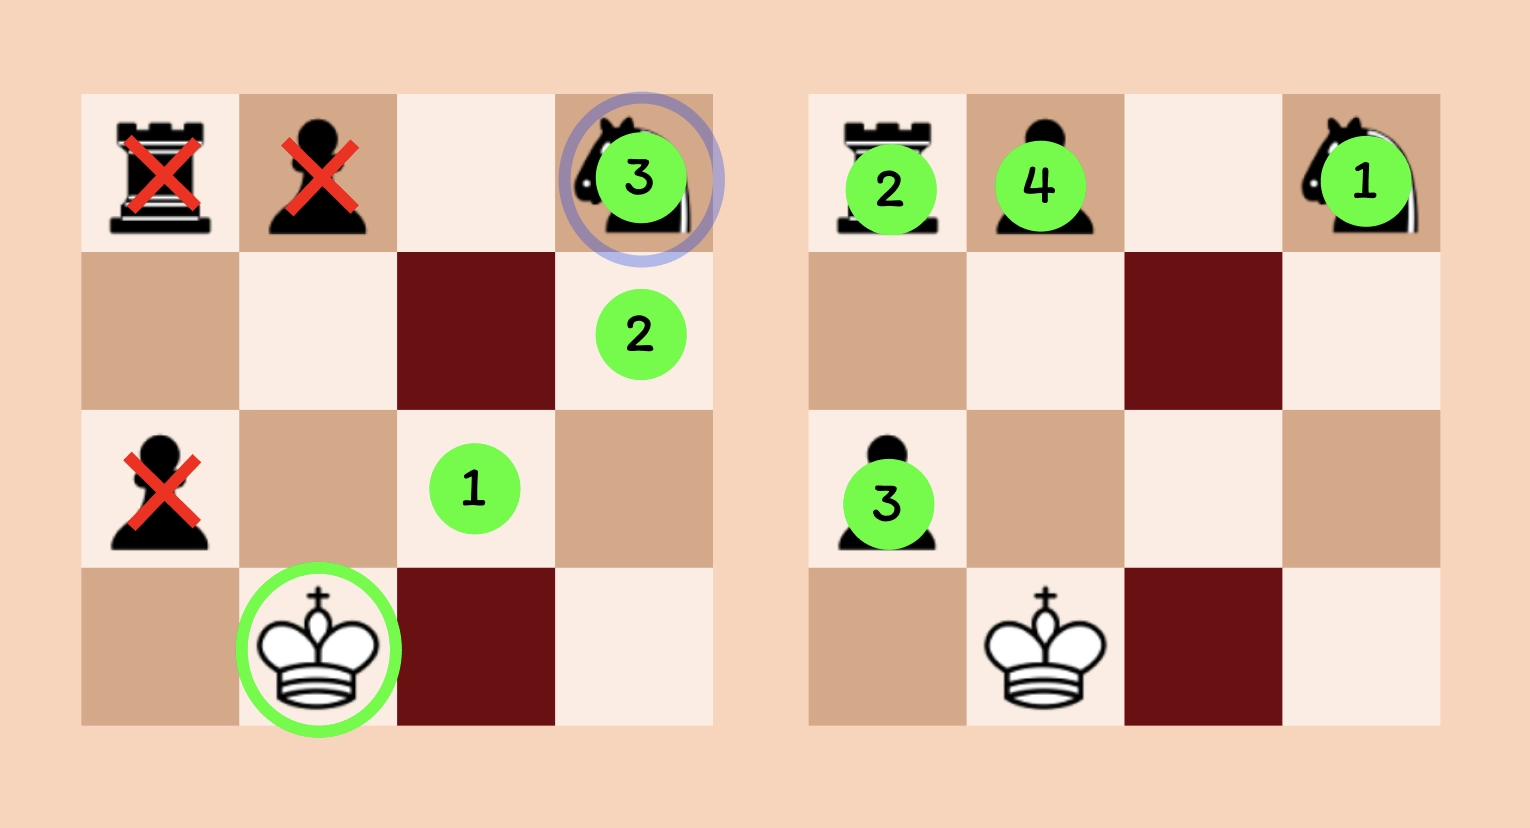 Lichess' Number 1 puzzle according to google, and it's WRONG!!!!! • page  1/2 • Game analysis •